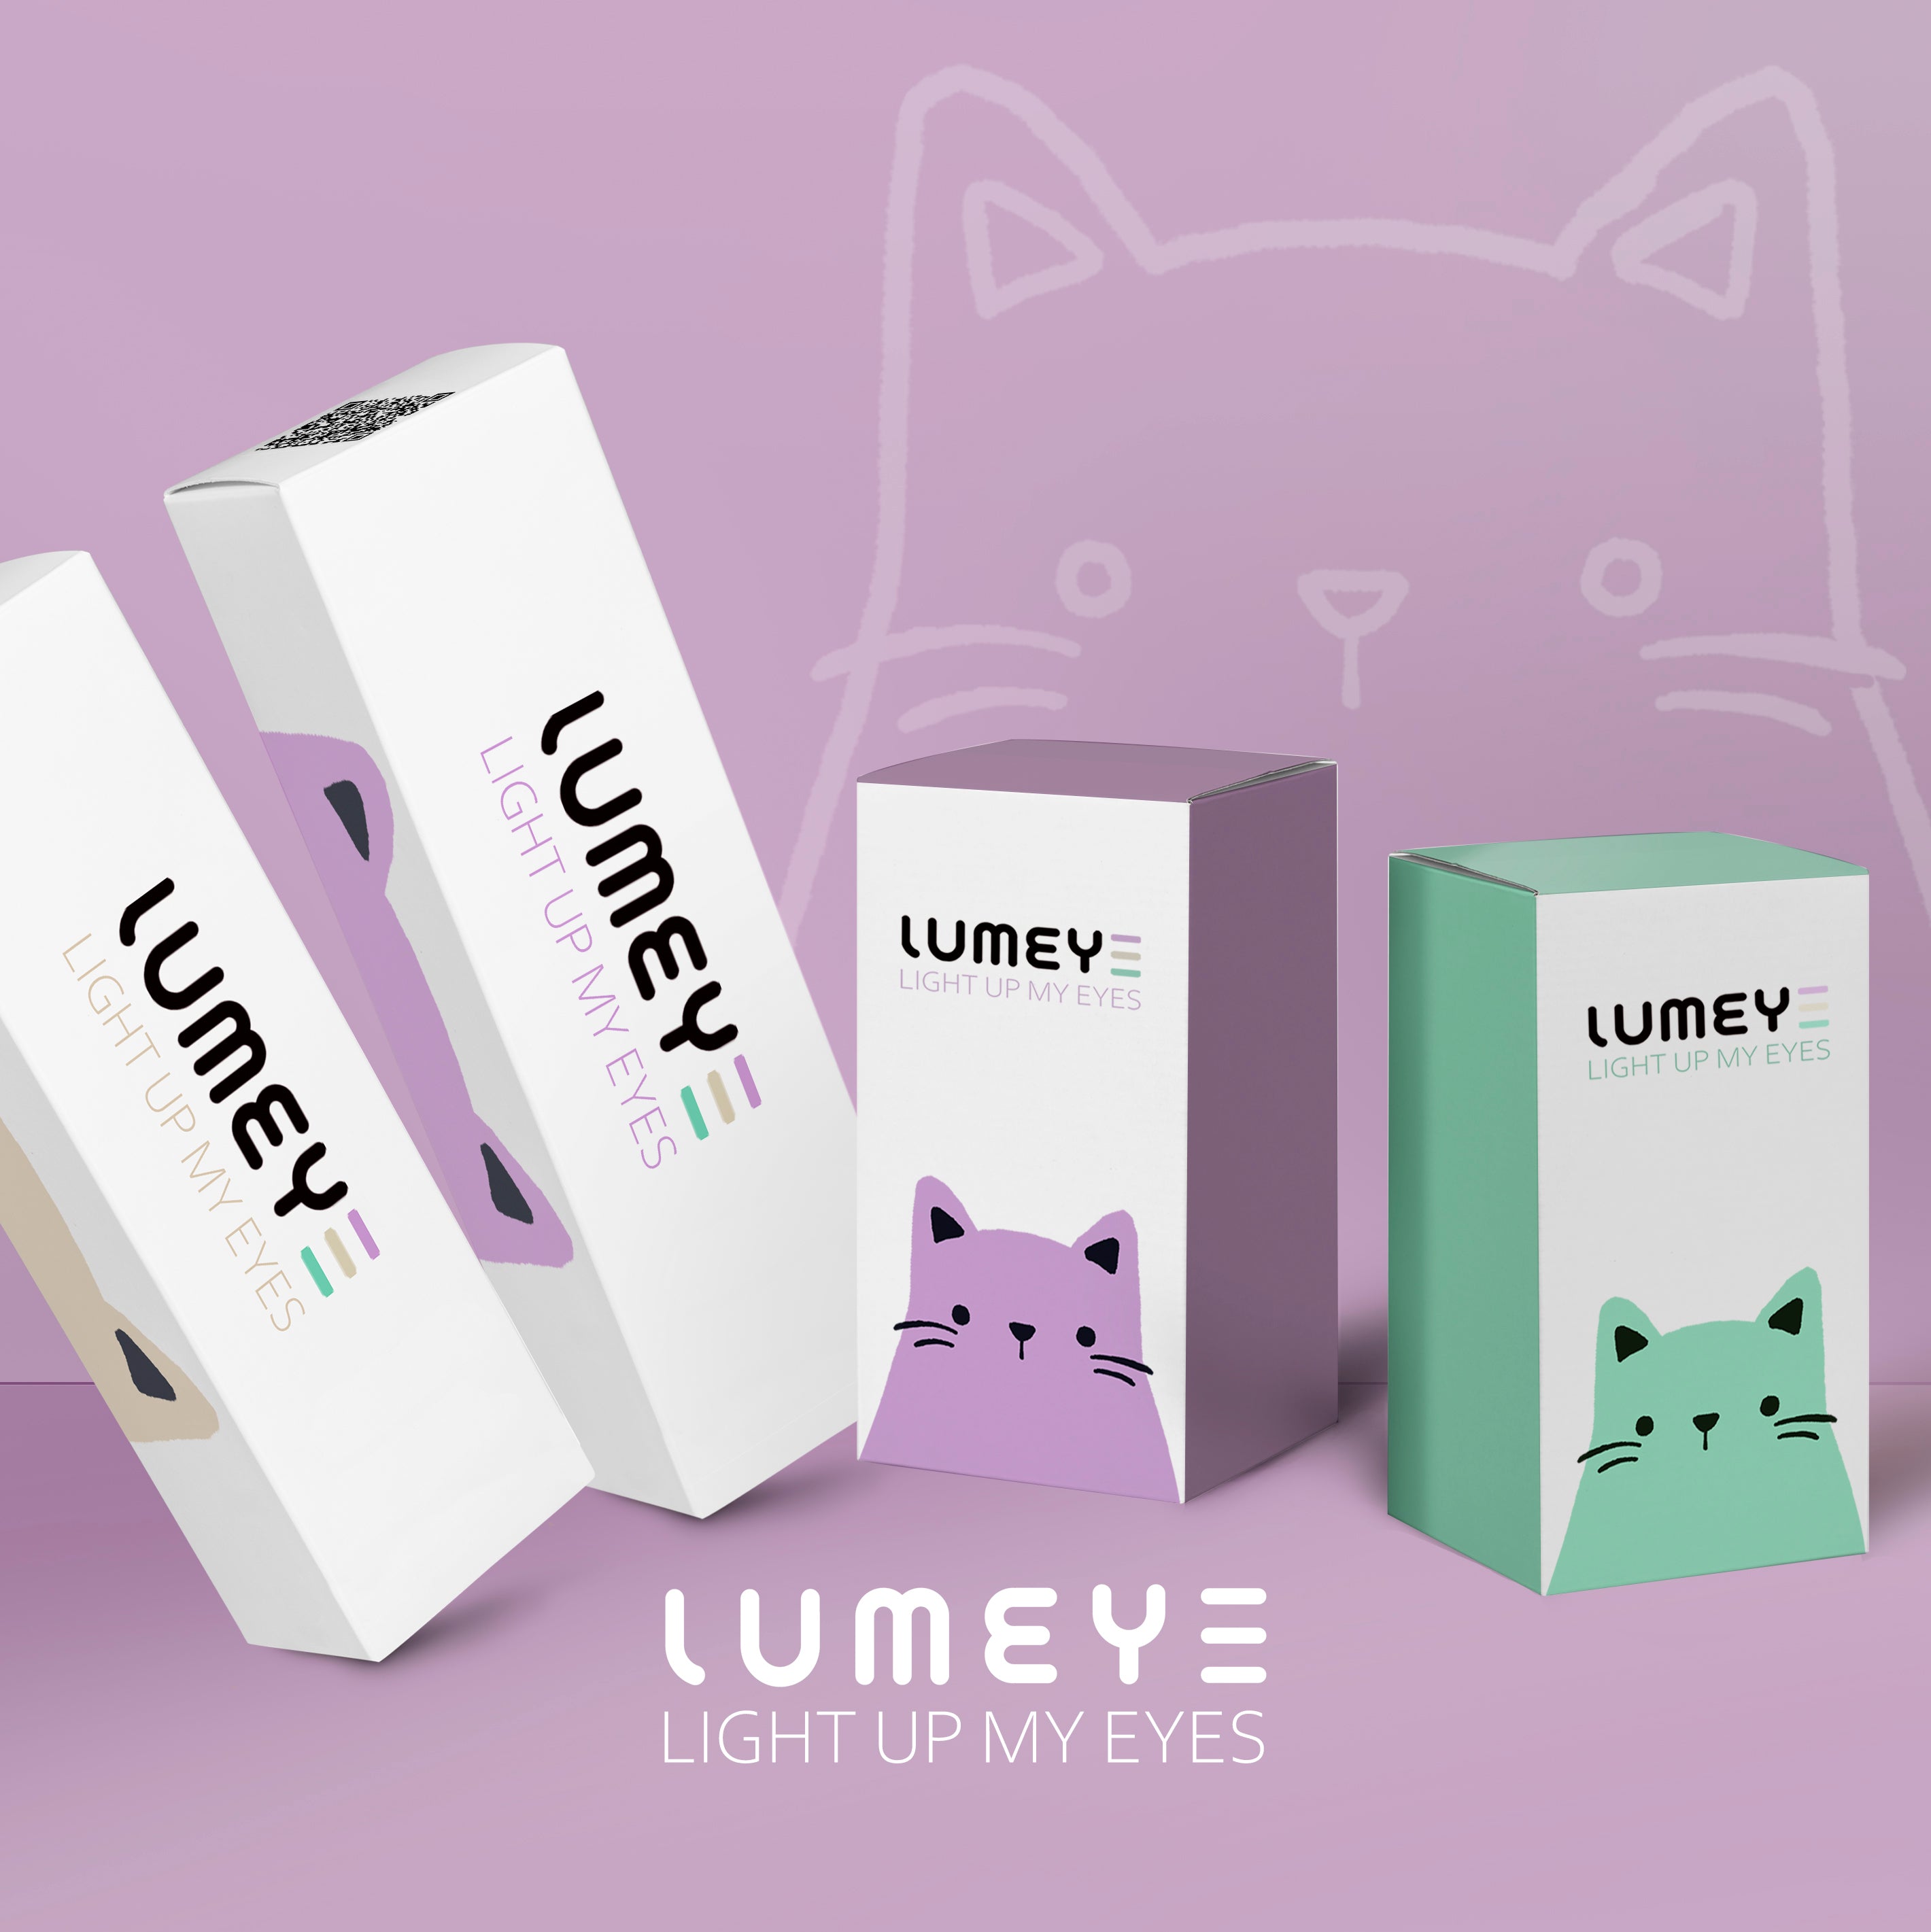 Best COLORED CONTACTS - LUMEYE Hoya Brown Colored Contact Lenses - LUMEYE